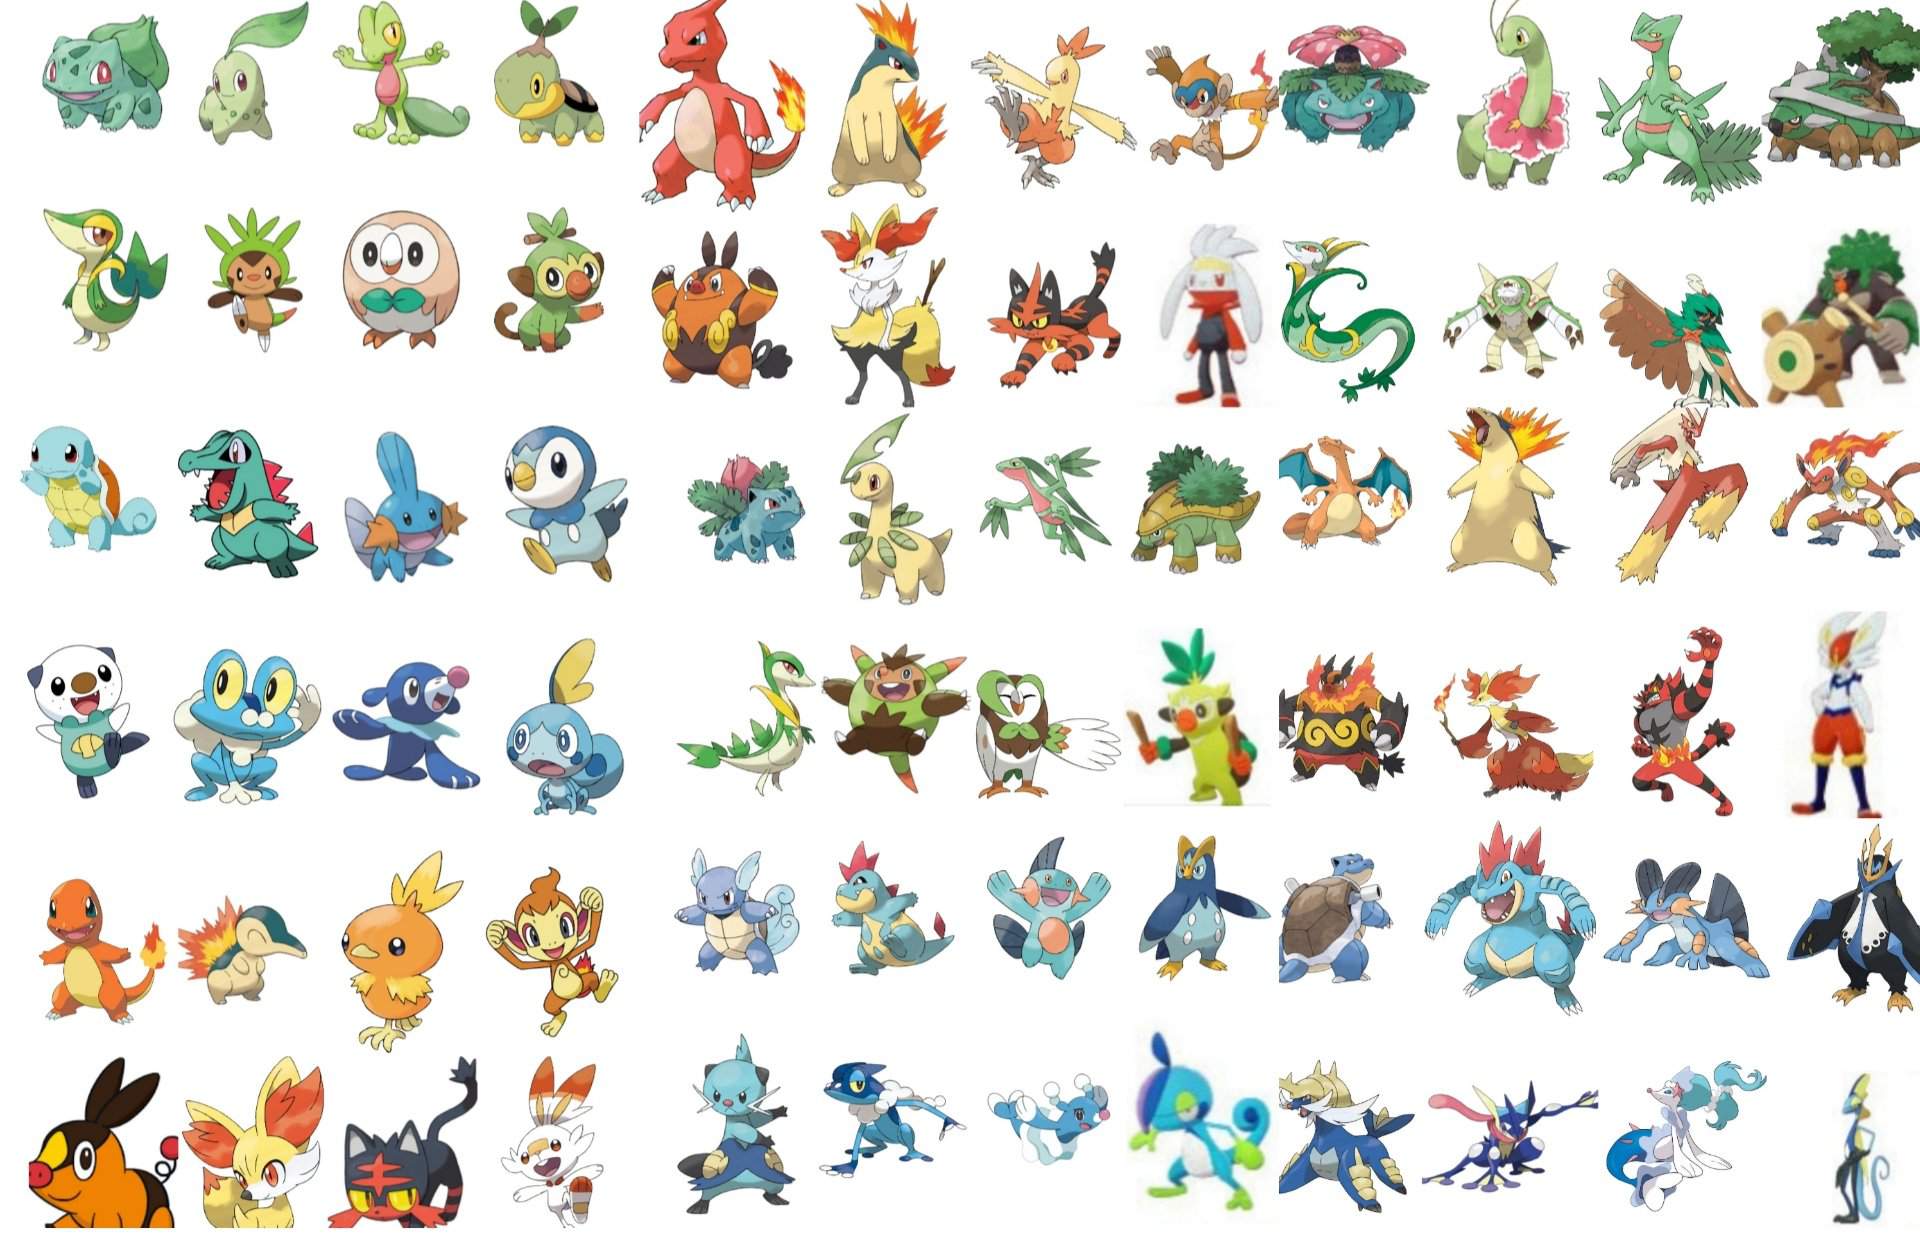 sooo-i-created-this-collage-of-all-the-starter-pok-mon-and-there